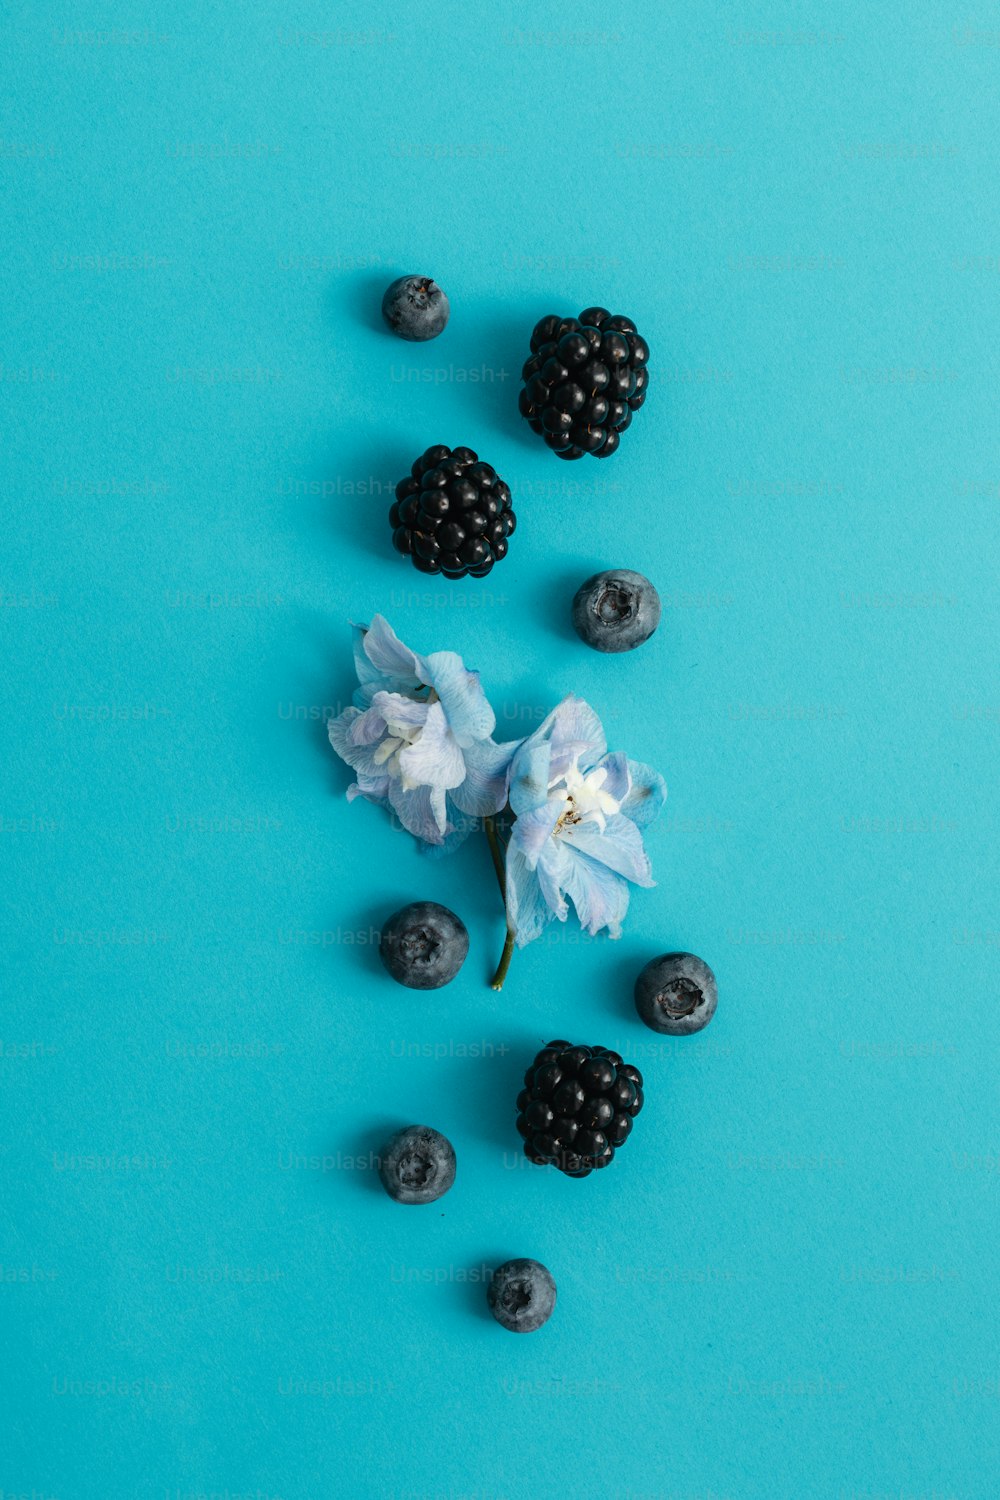 blueberries, blackberries, and a flower on a blue background